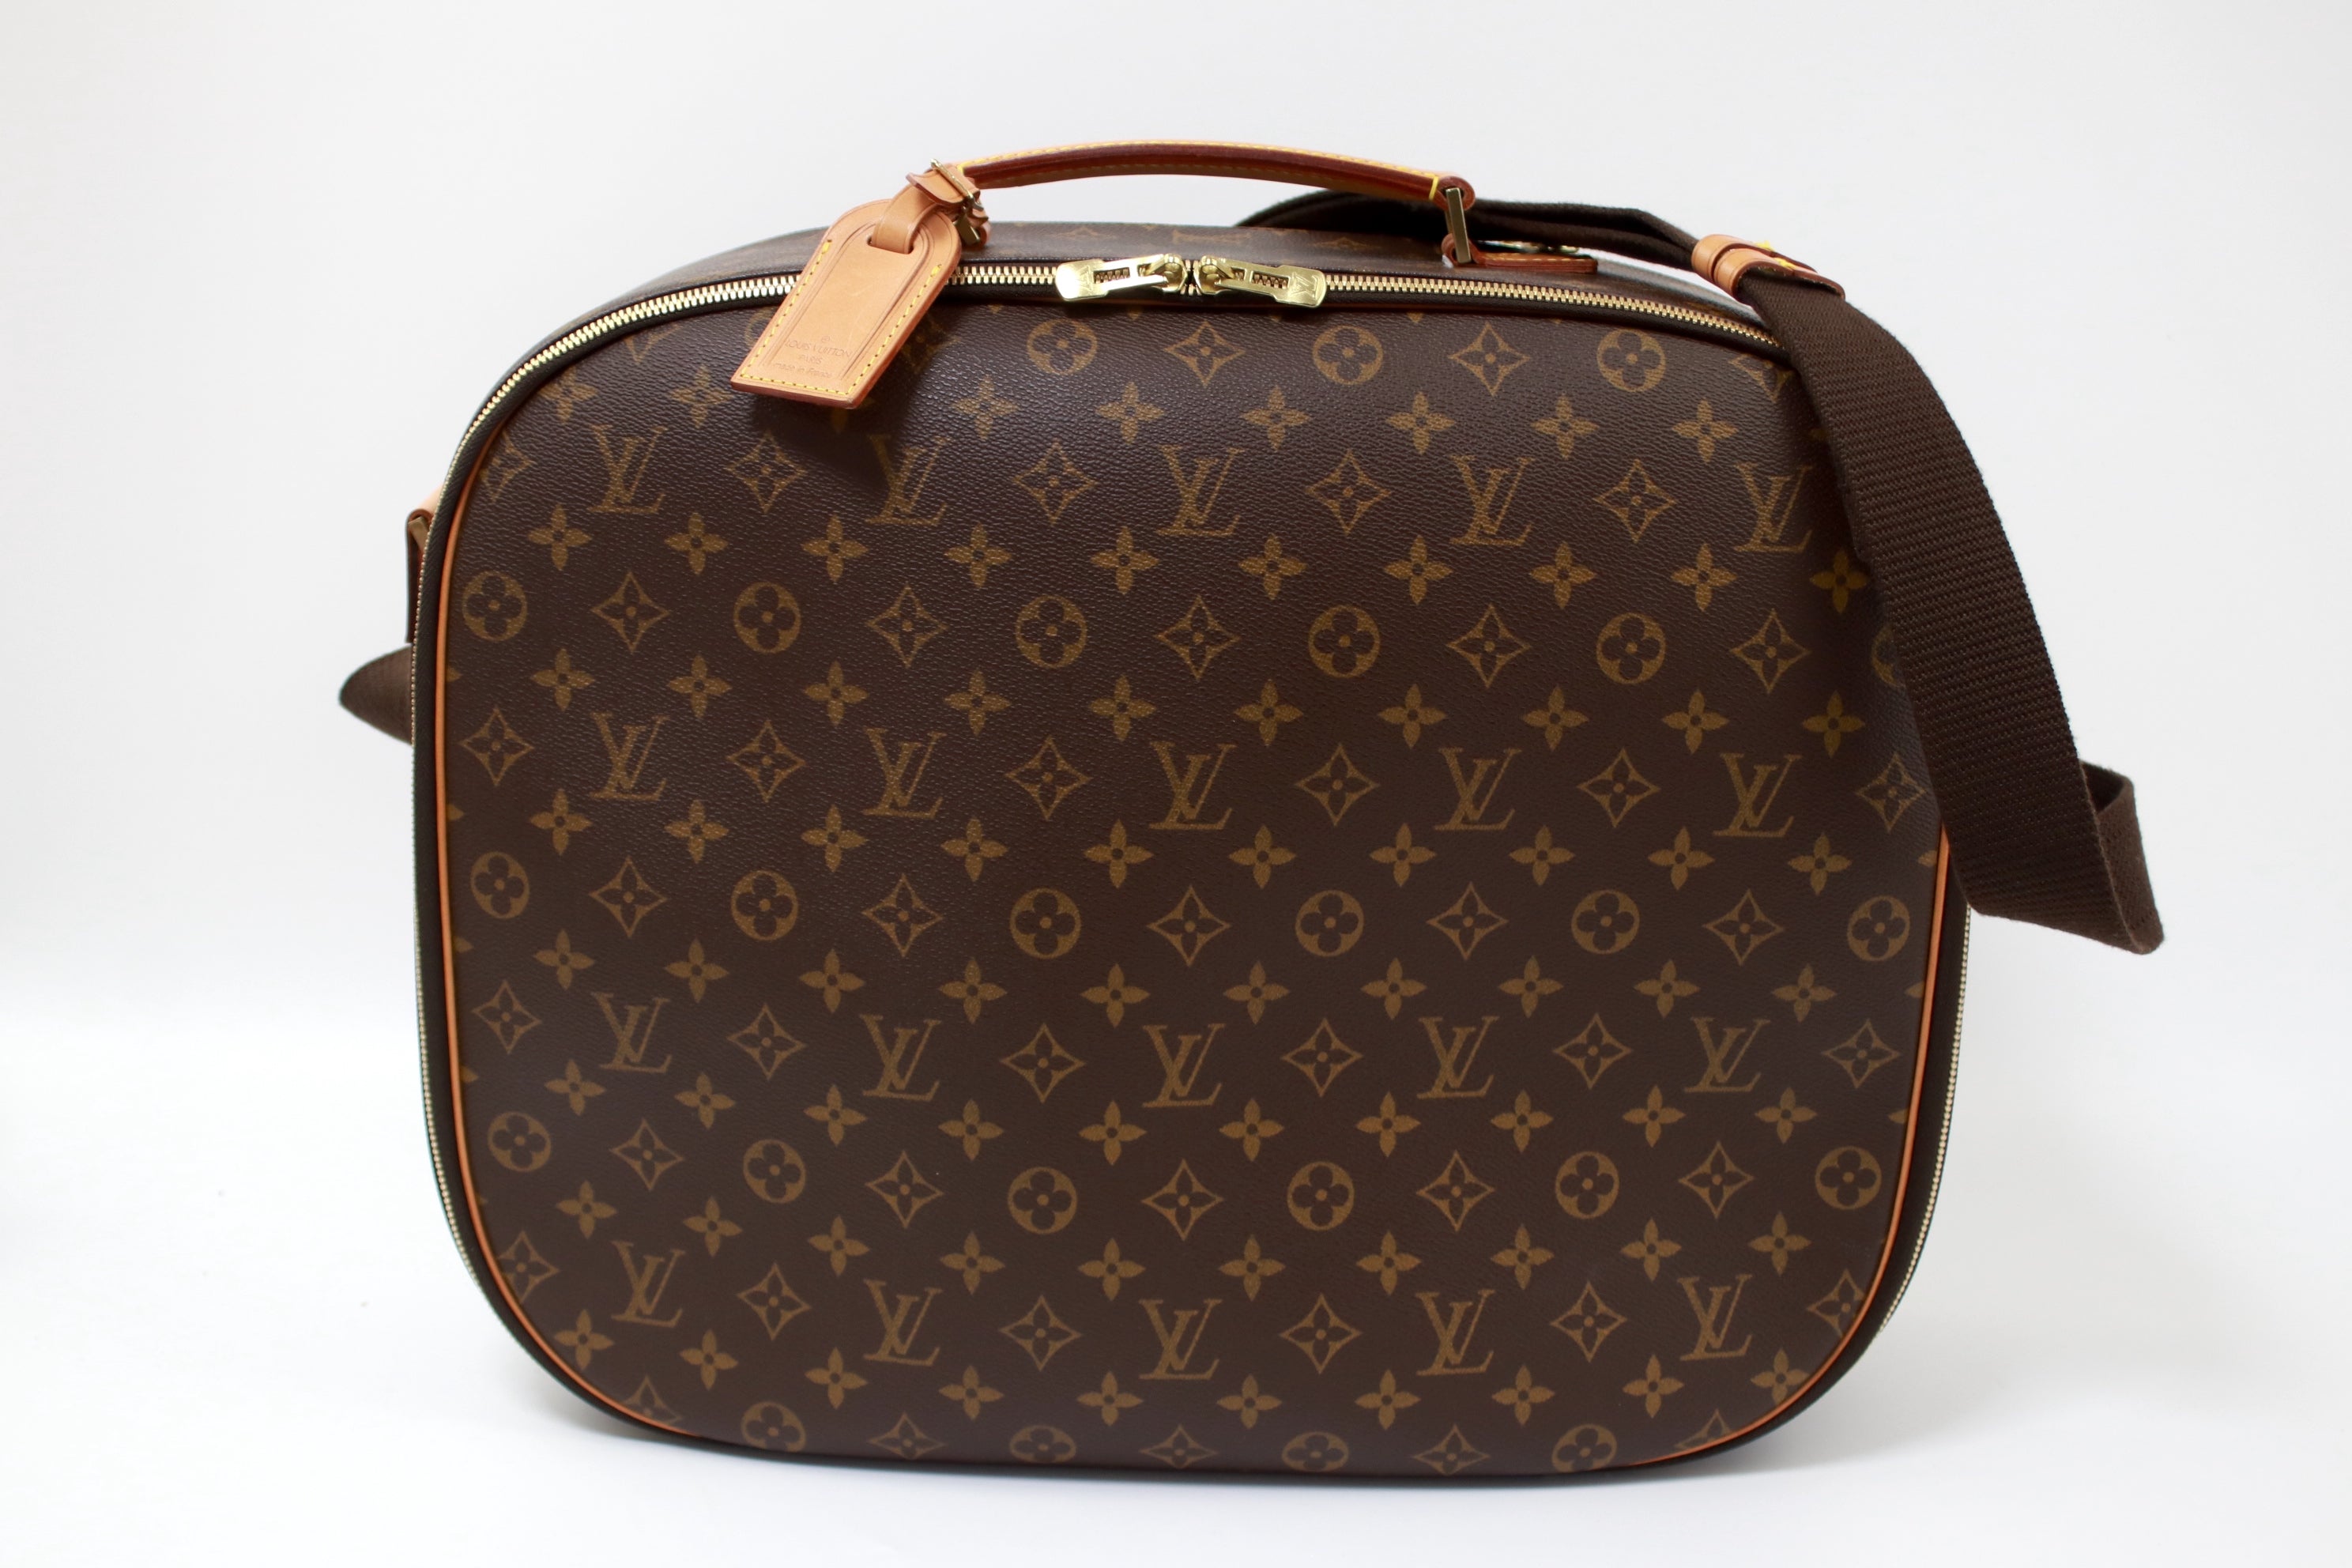 Louis Vuitton Packall Pm Travel Bag Used (6019)